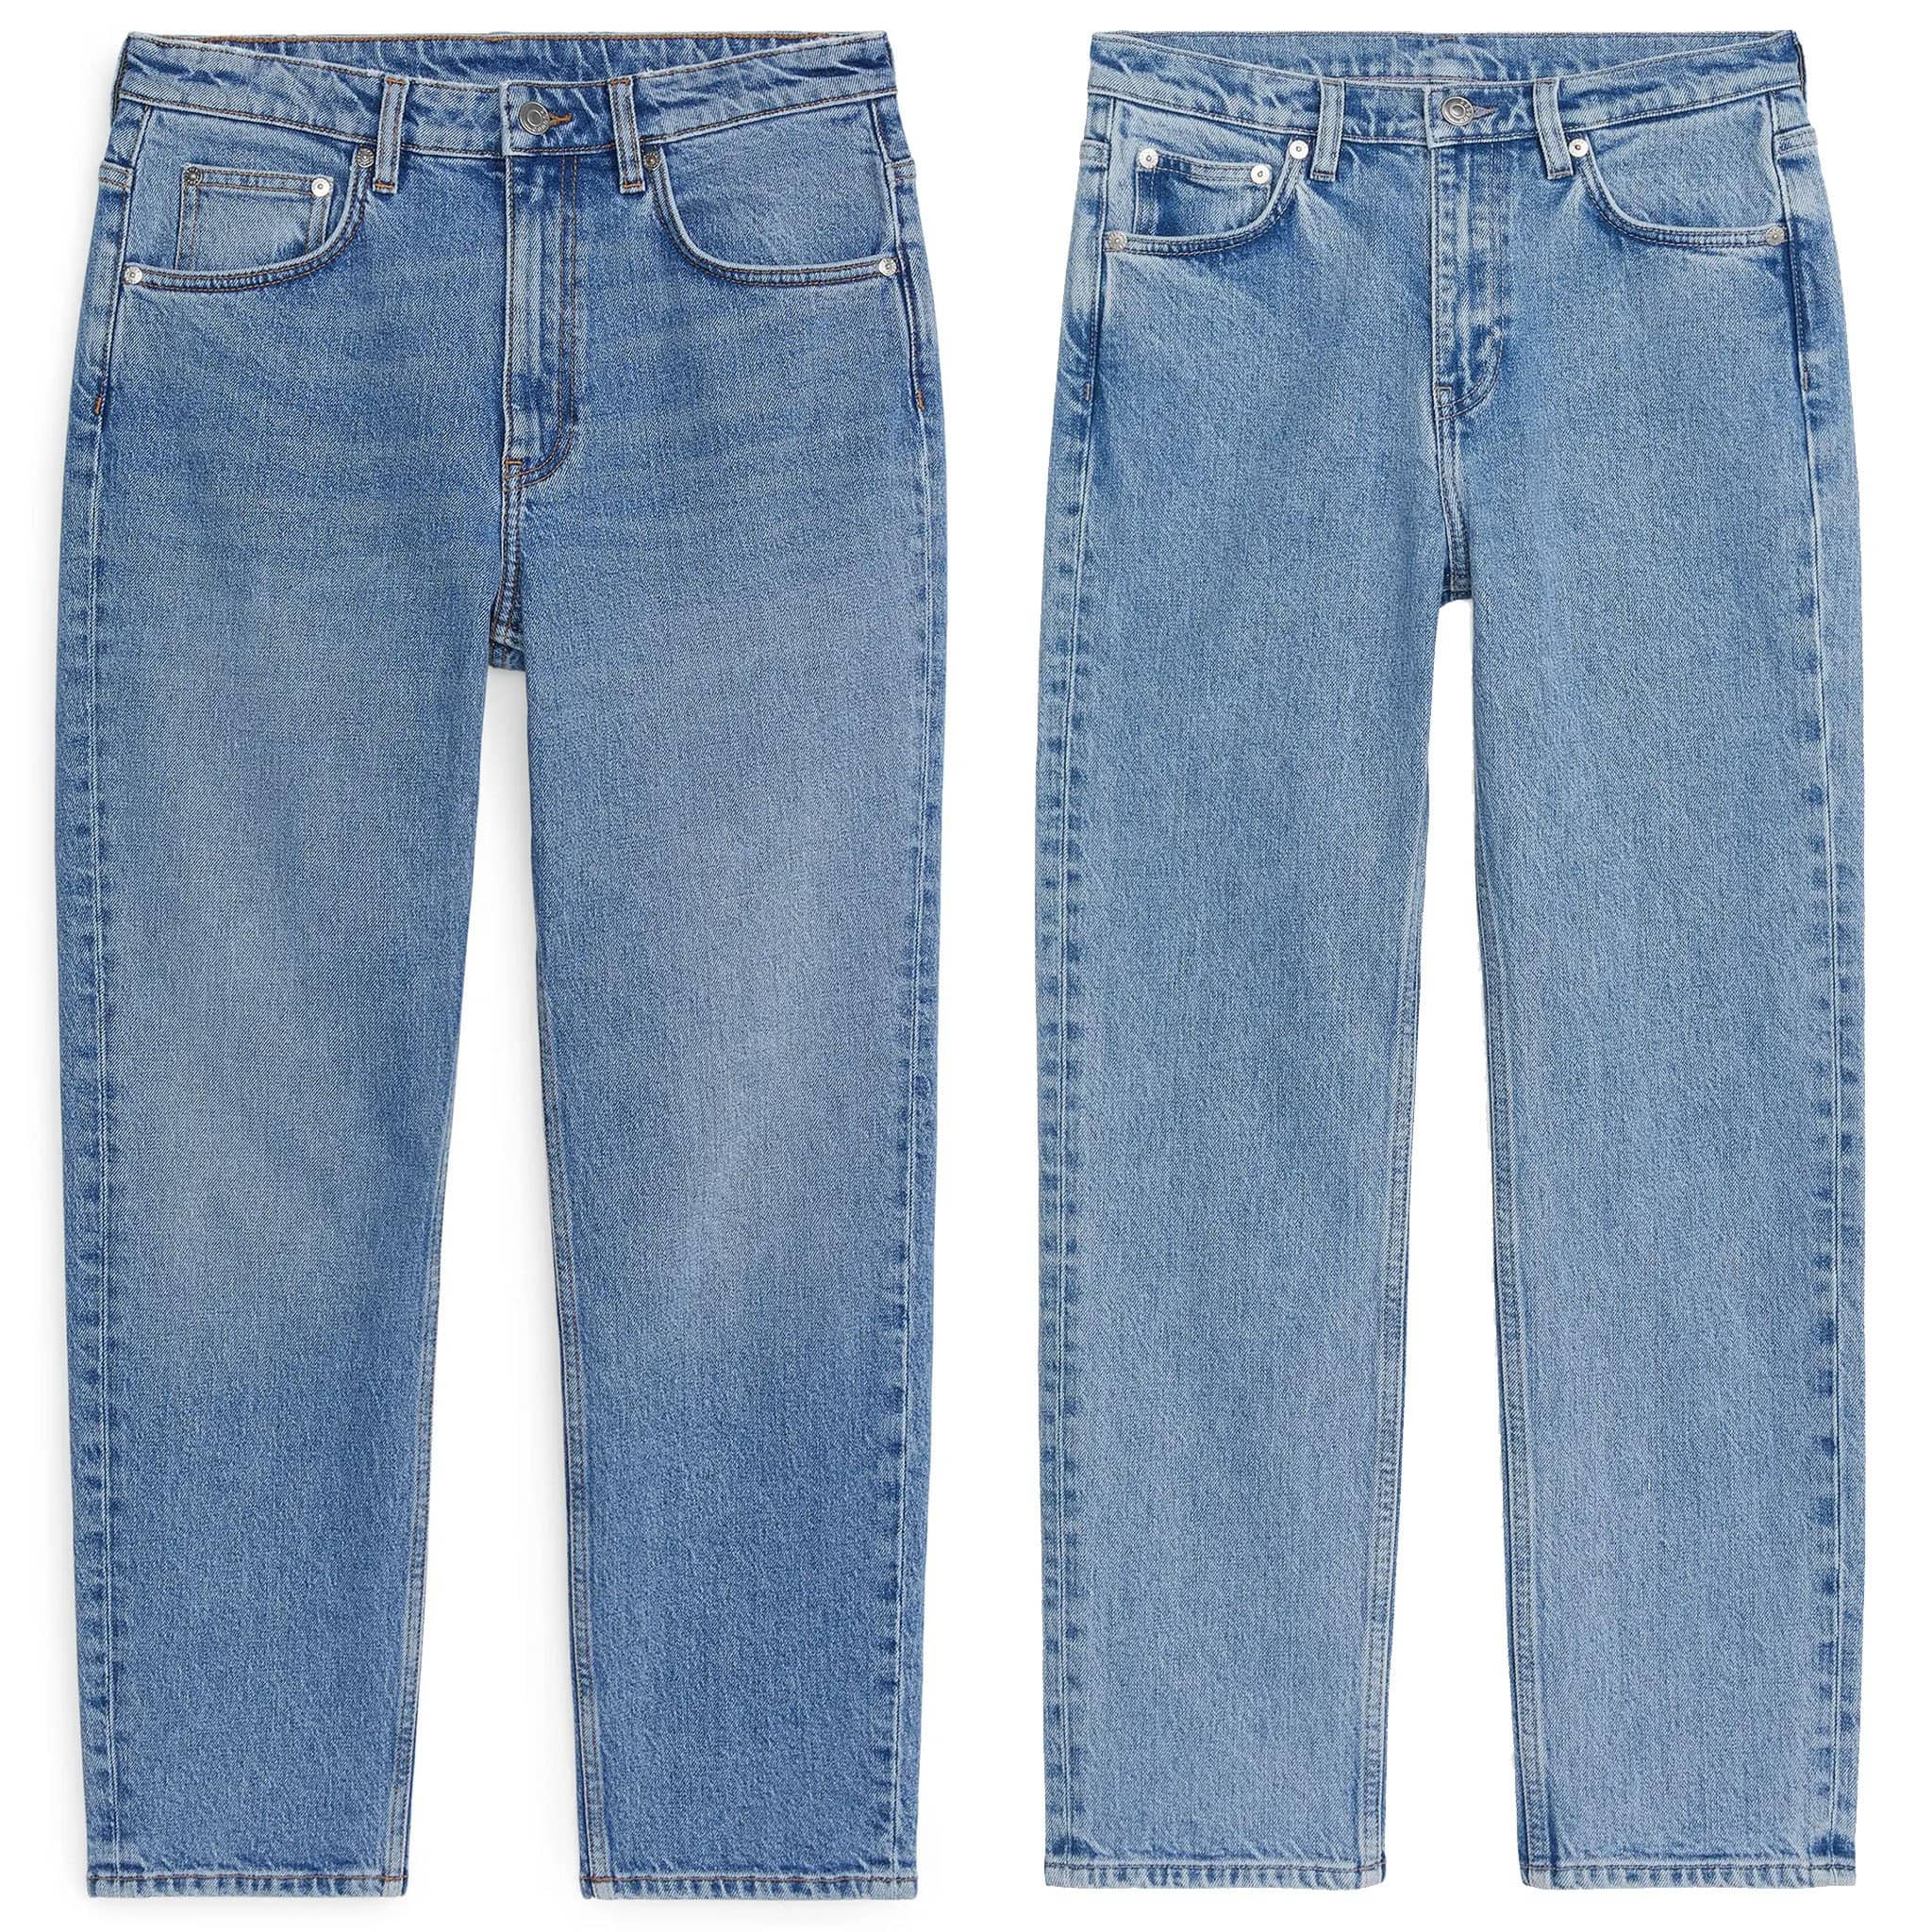 These are a classic pair of five-pocket mid-rise straight-leg jeans made from organic cotton